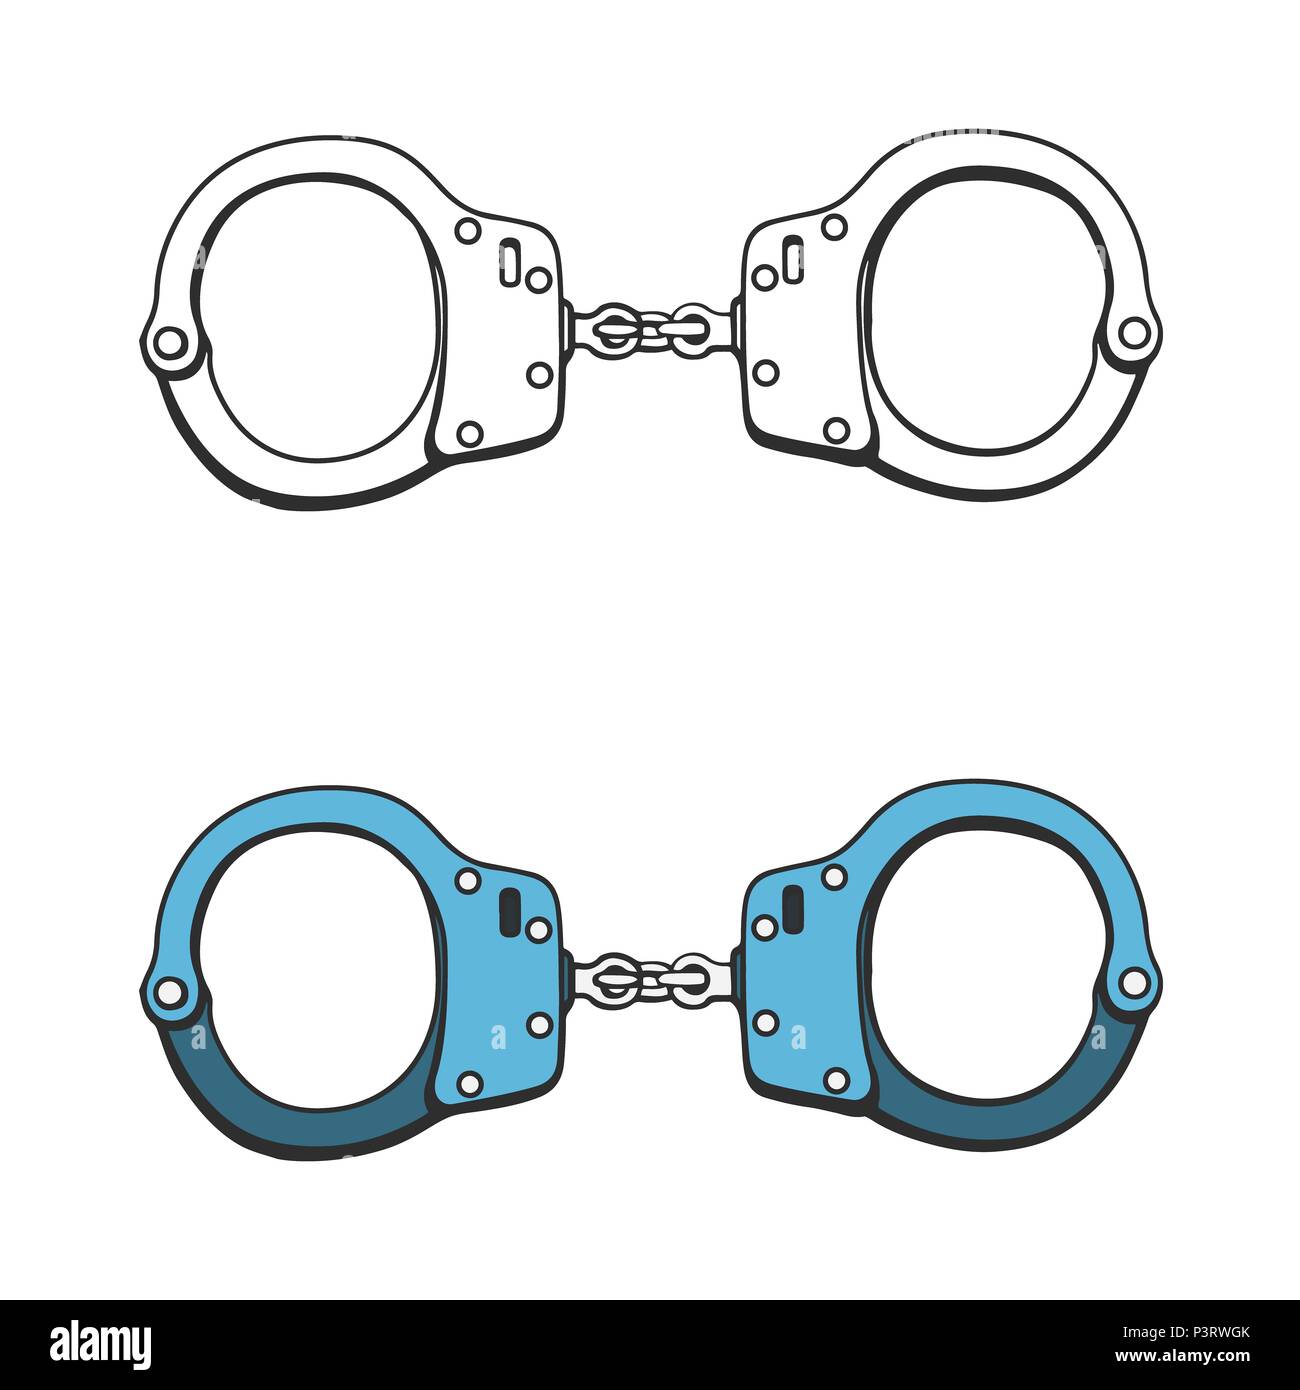 Handcuffs. Hand drawn sketch  black. Isolated on white background. Stock Photo